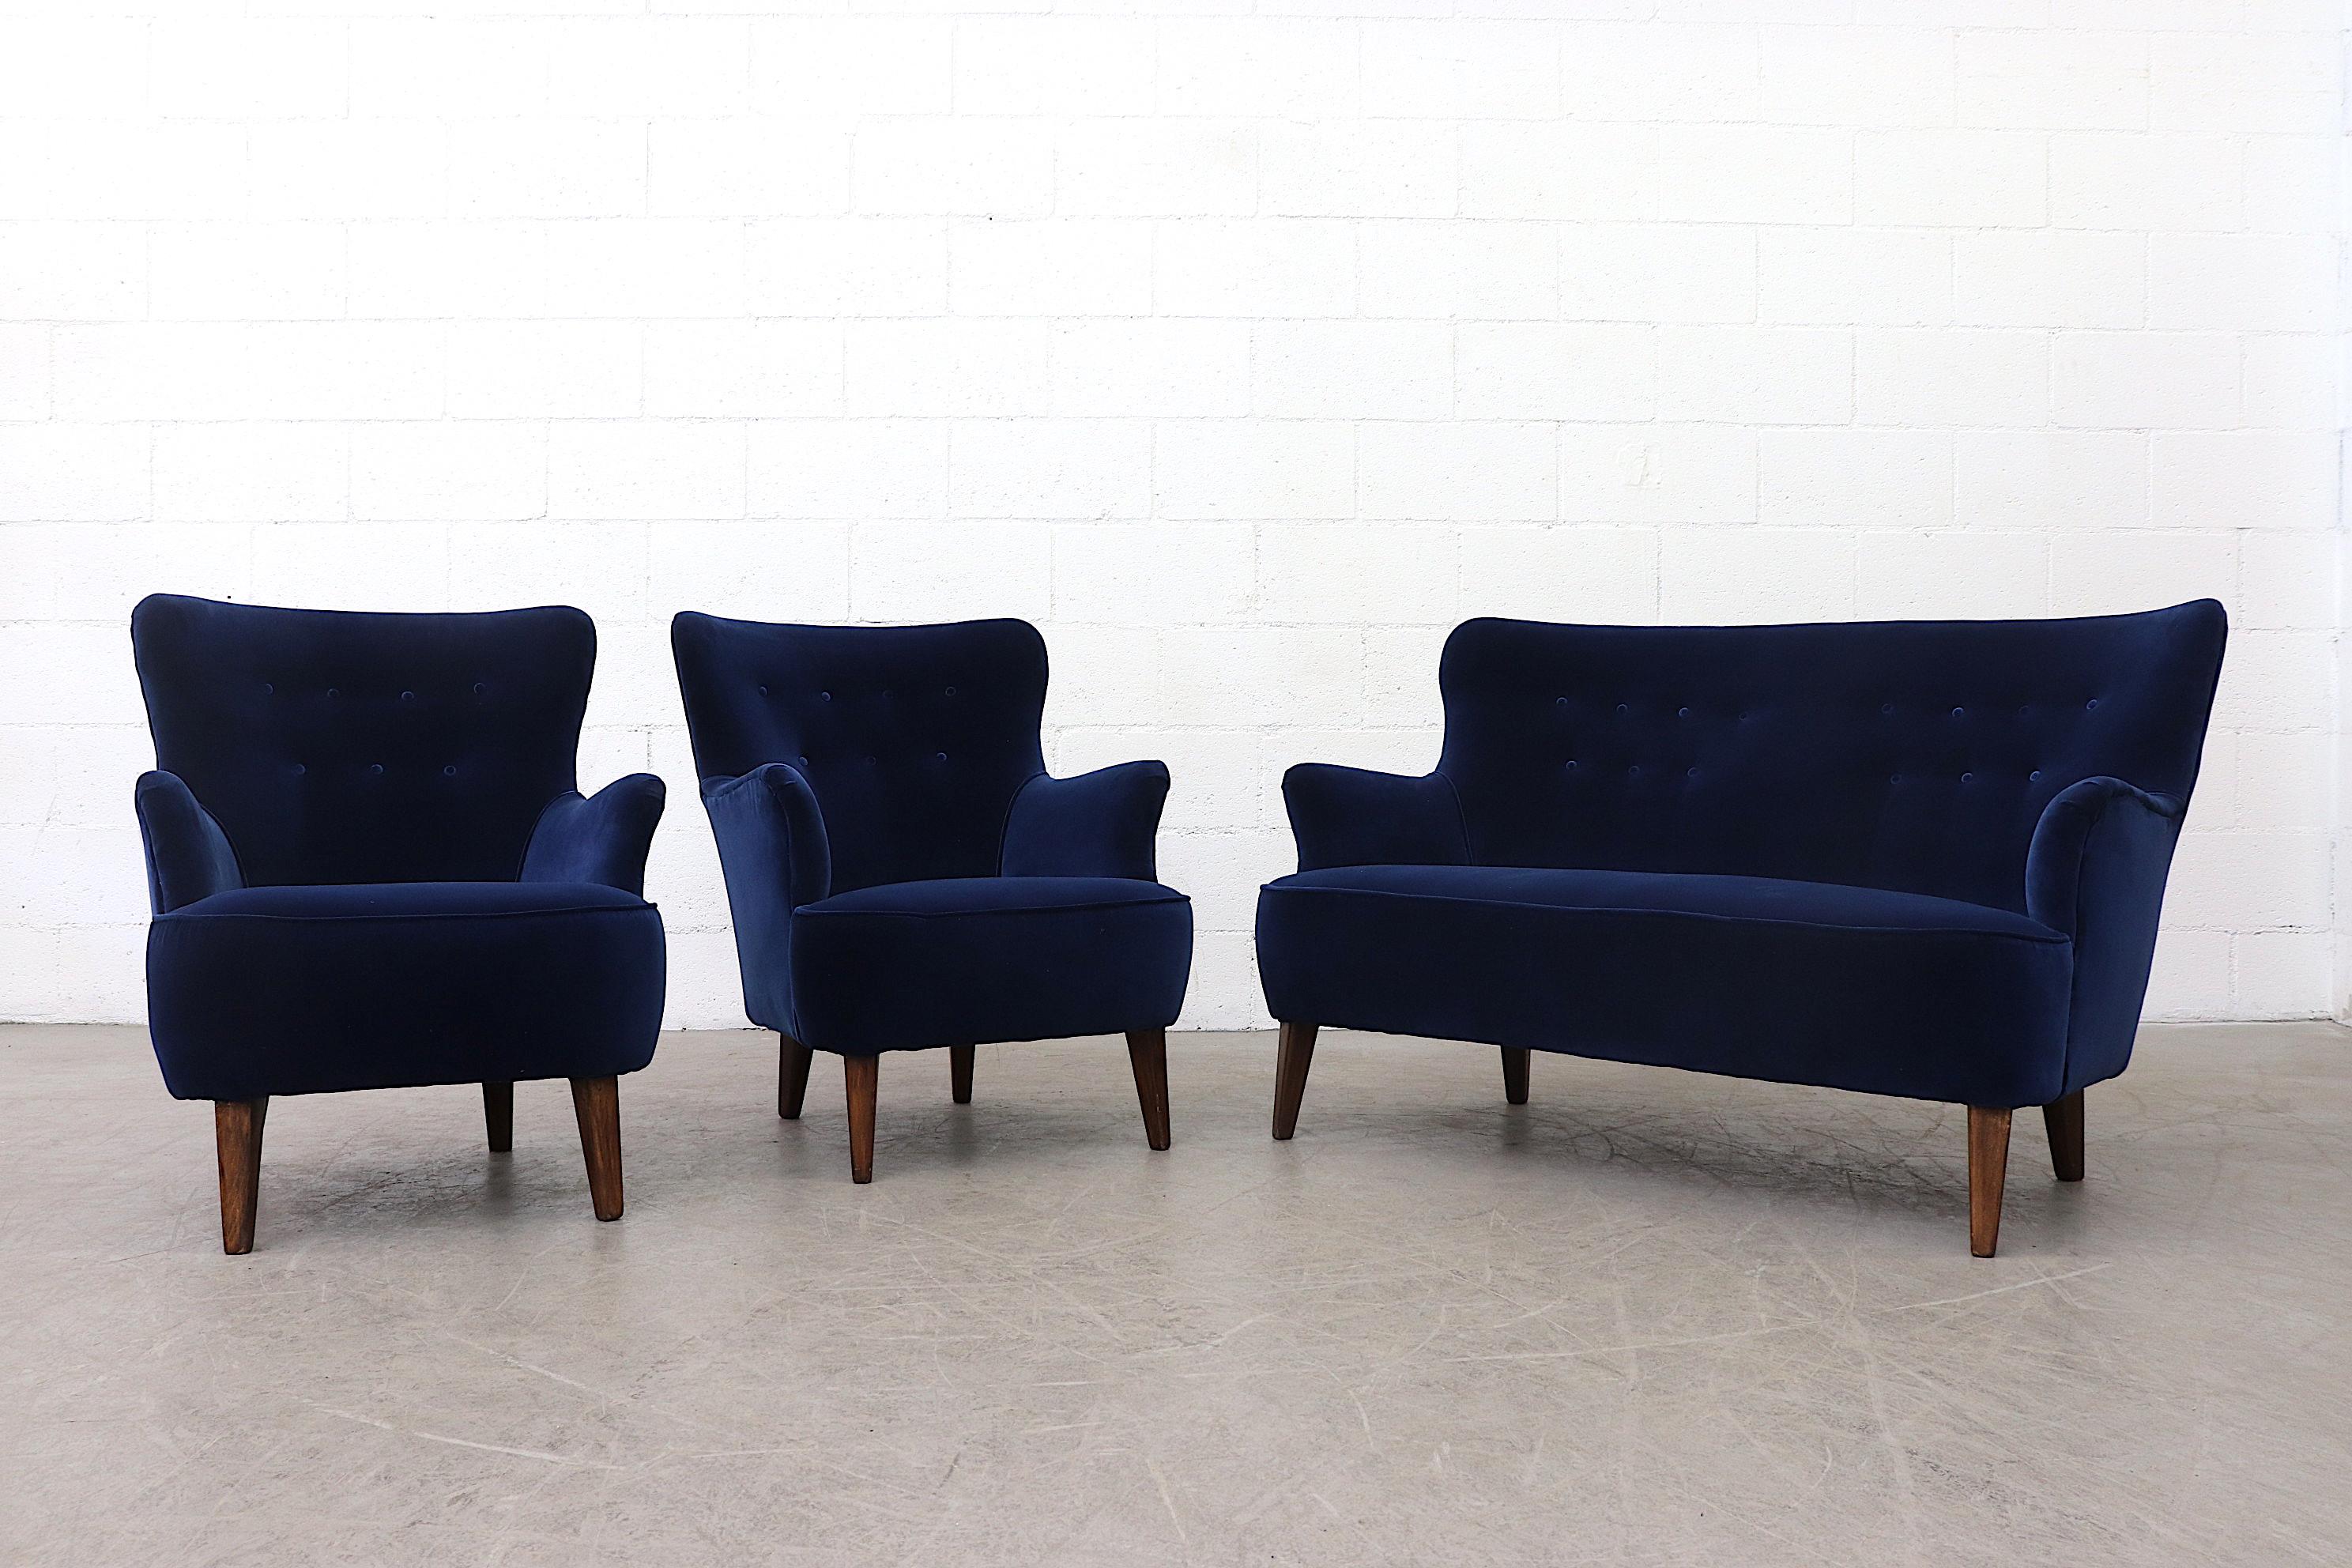 Theo Ruth Loveseat for Artifort newly upholstered in navy blue velvet. Legs in original condition with wear consistent with its age and use. Pictured with matching lounge chairs (LU922414476222). Also available and listed separately.